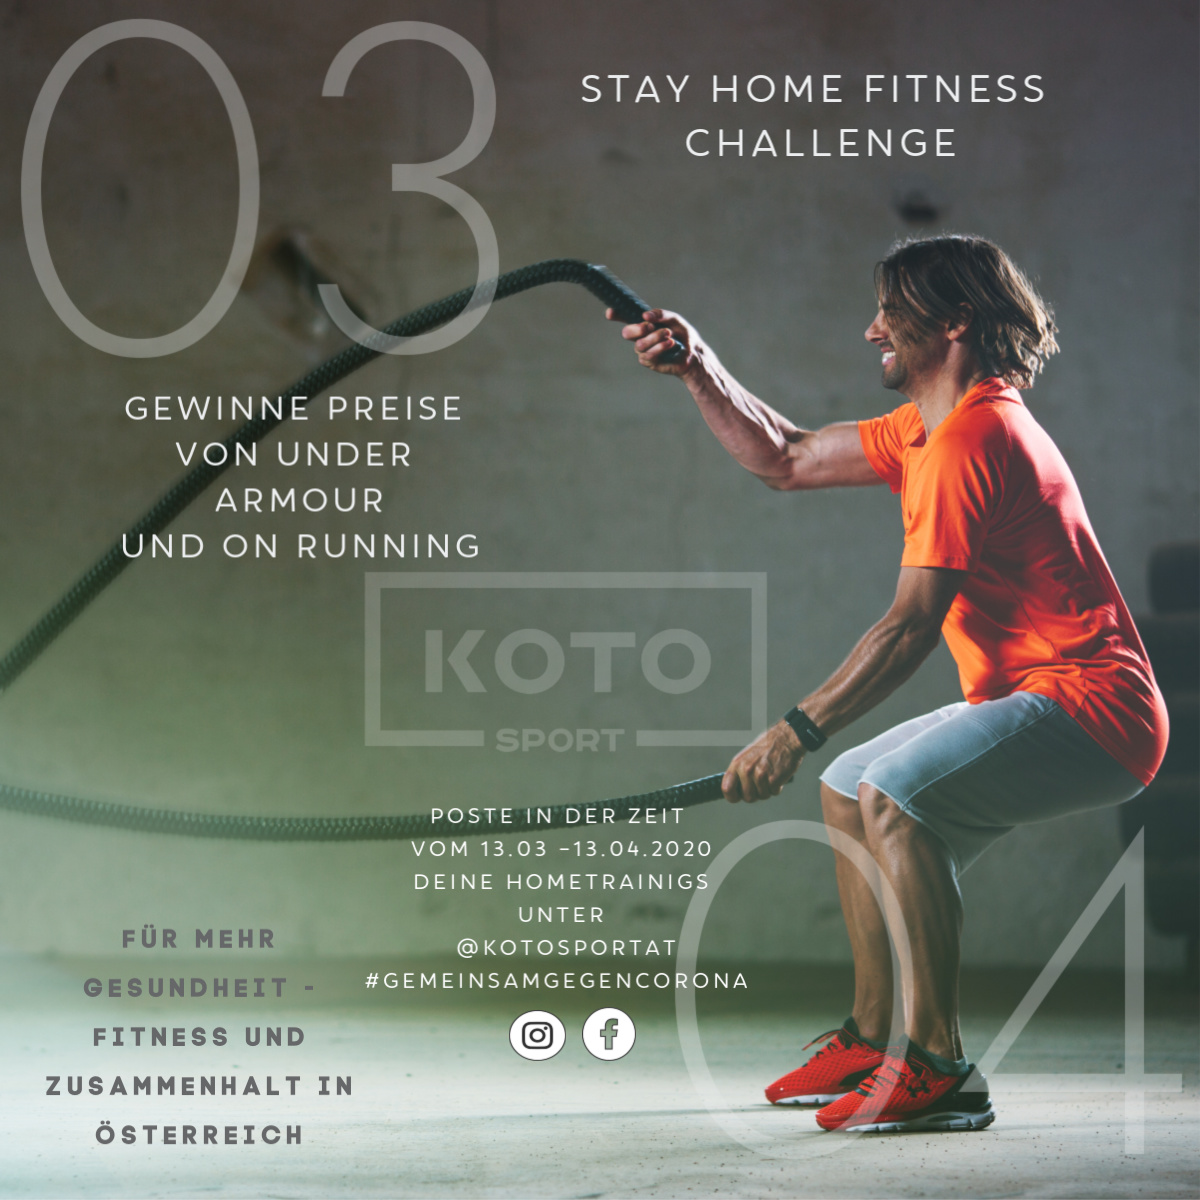 STAY HOME FITNESS CHALLENGE